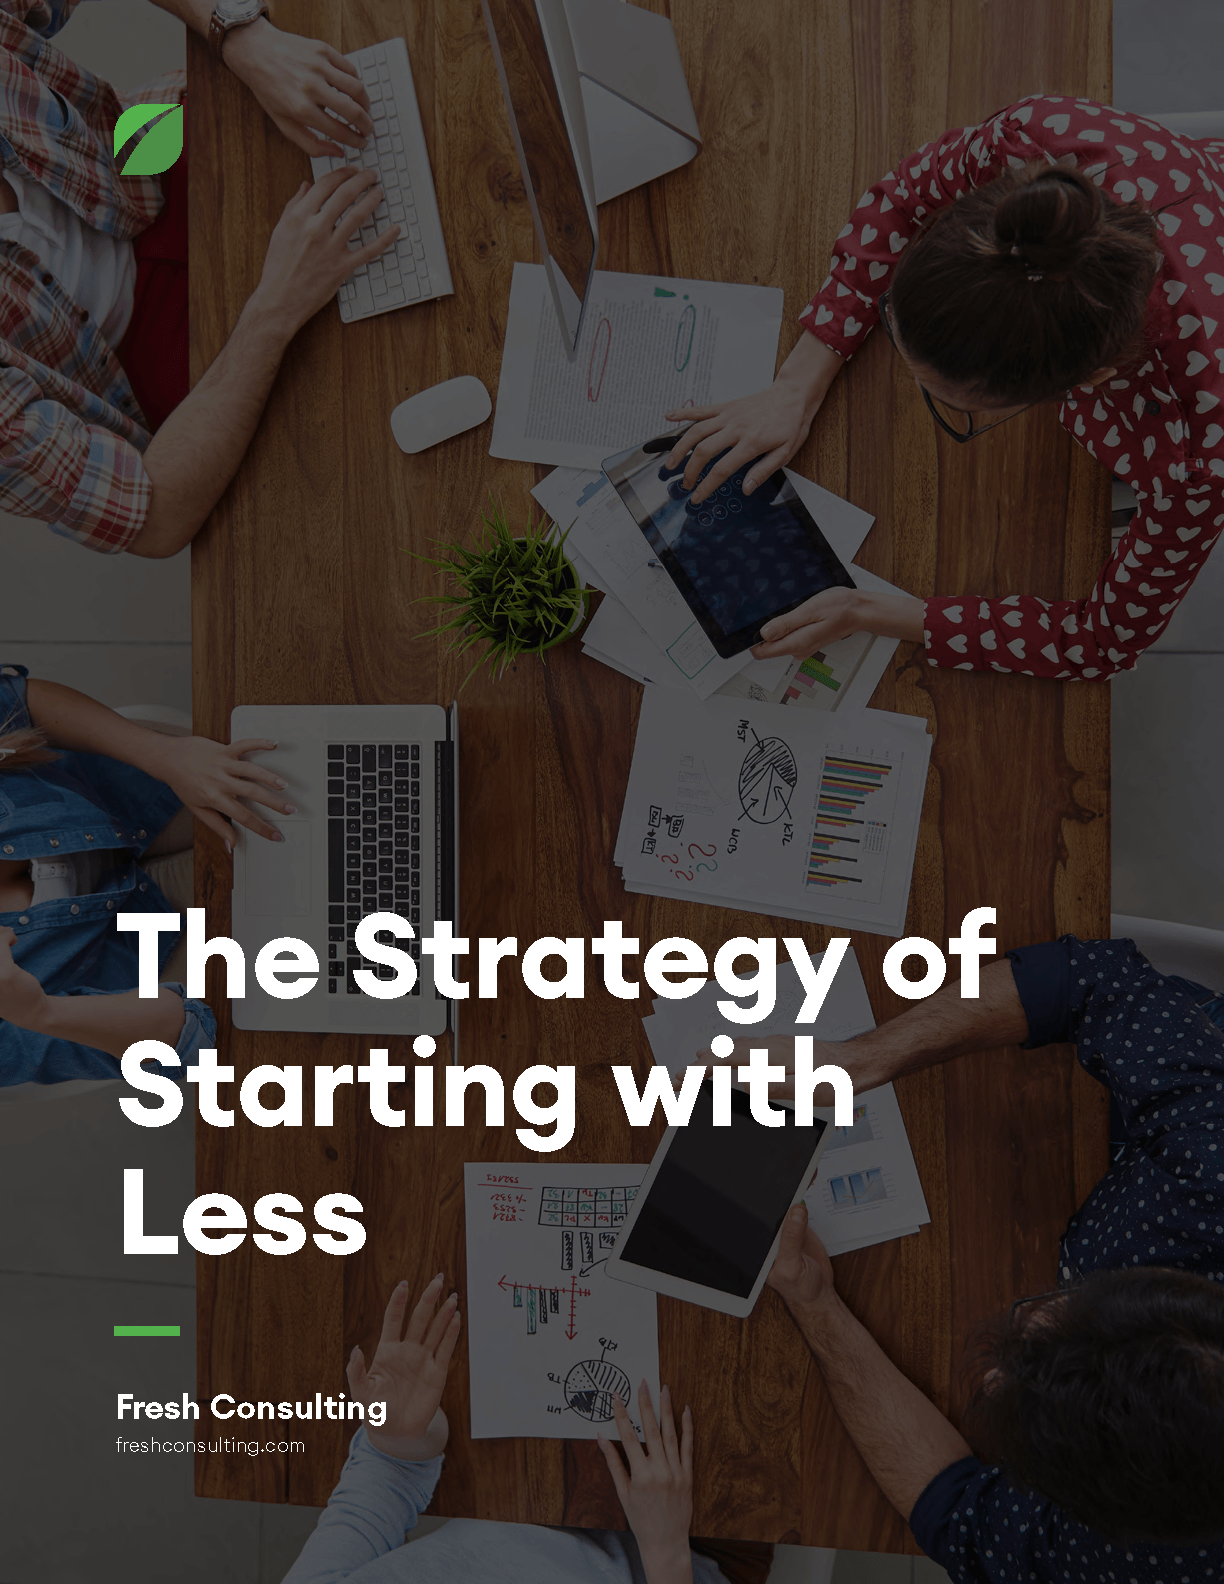 Cover of the white paper "The Strategy of Starting with Less."